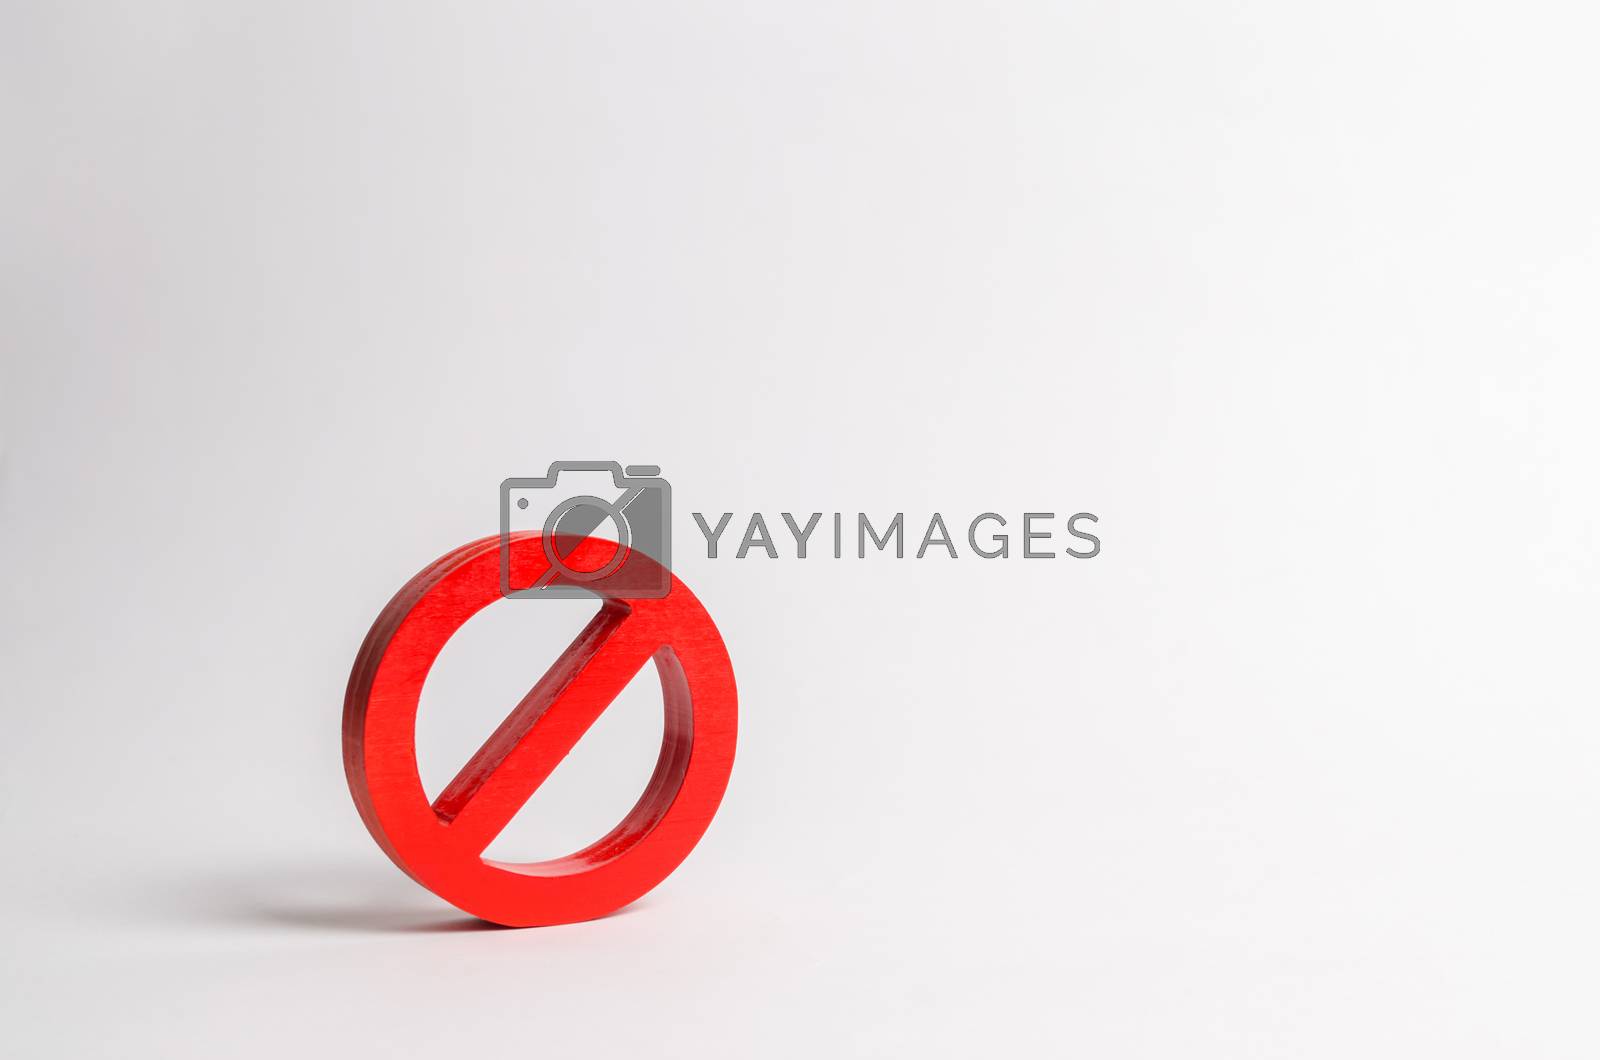 Royalty free image of No sign or No symbol. Minimalism. The concept of prohibition and restriction. Censorship, control over the Internet and information. Restrictive laws. Crazy laws printer. something is not permitted by iLixe48